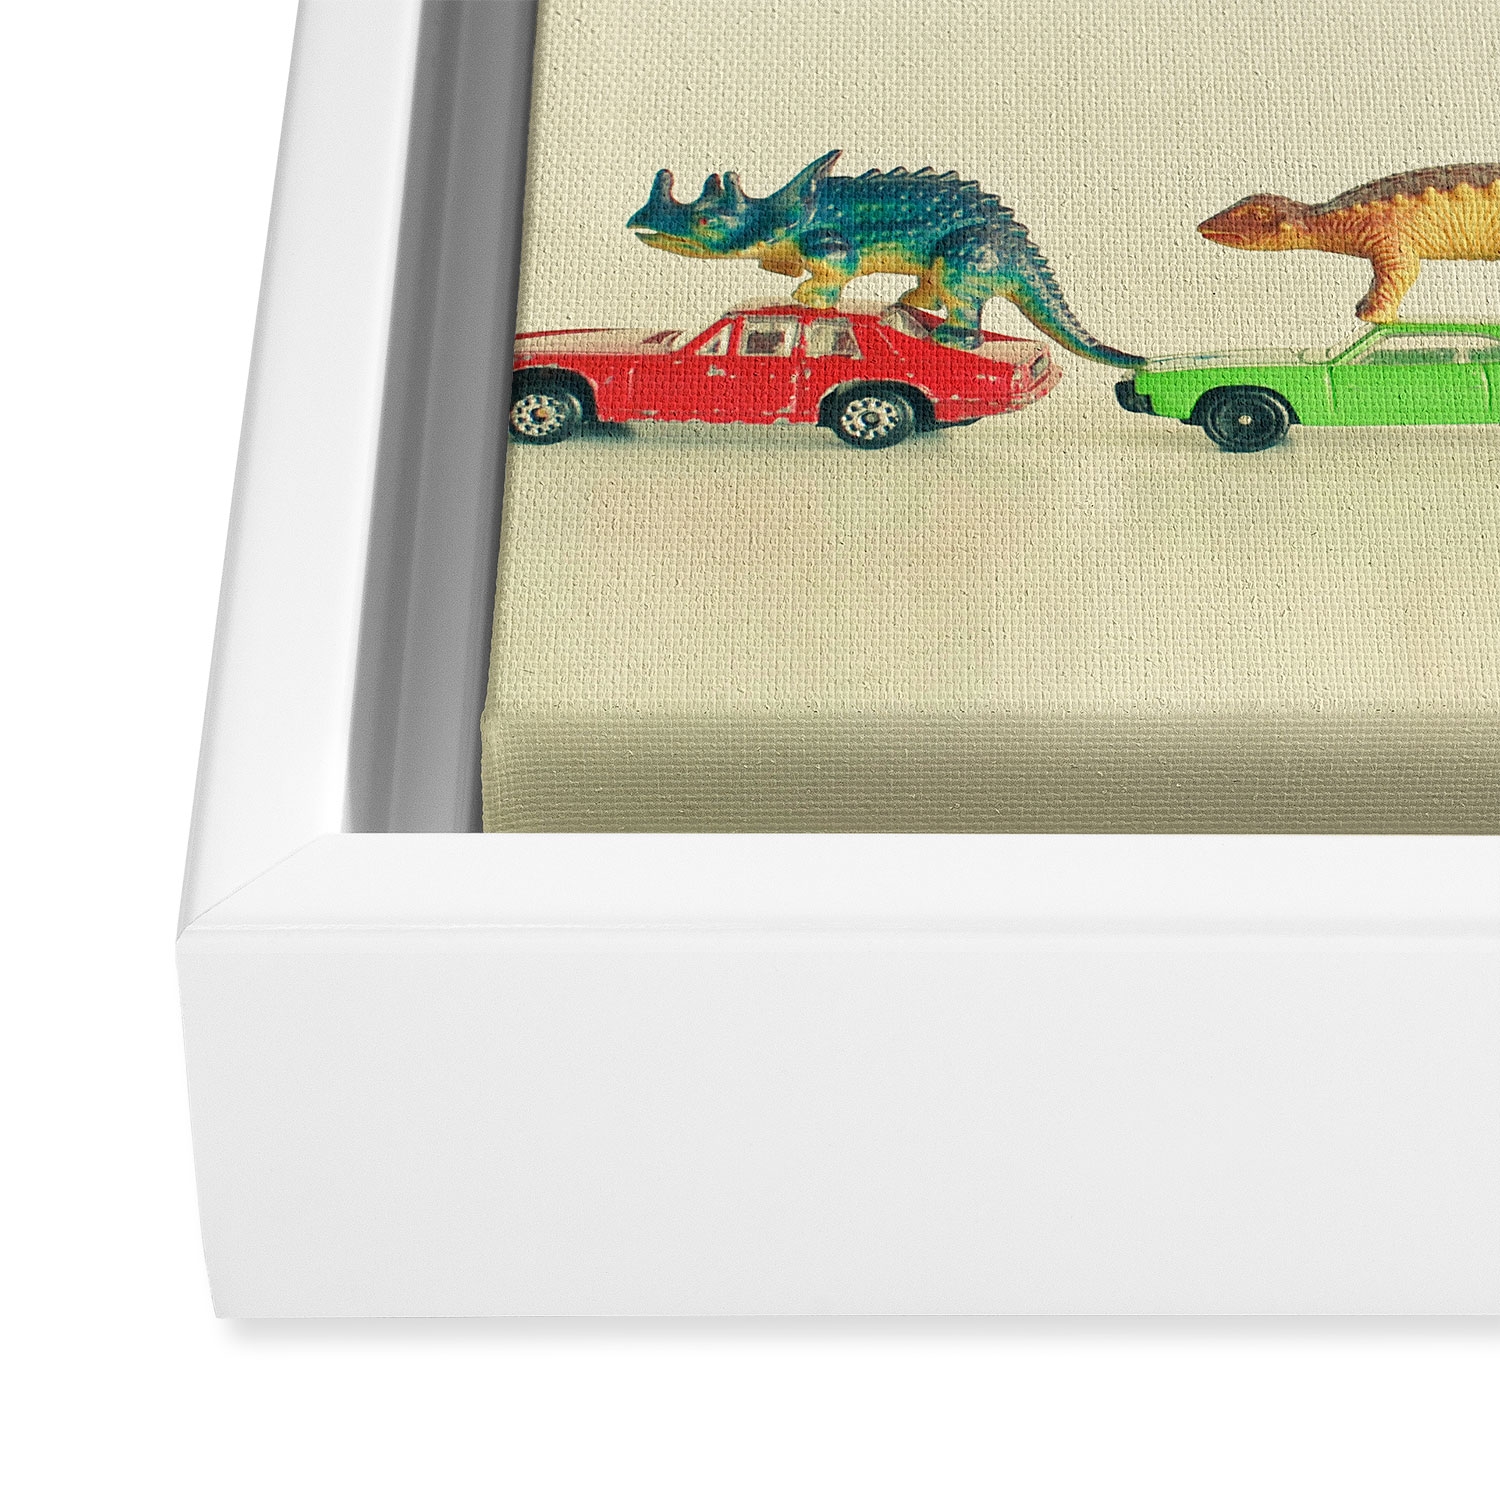 Dinosaurs Ride Cars by Cassia Beck - Art Canvas 24" x 30" - Image 1